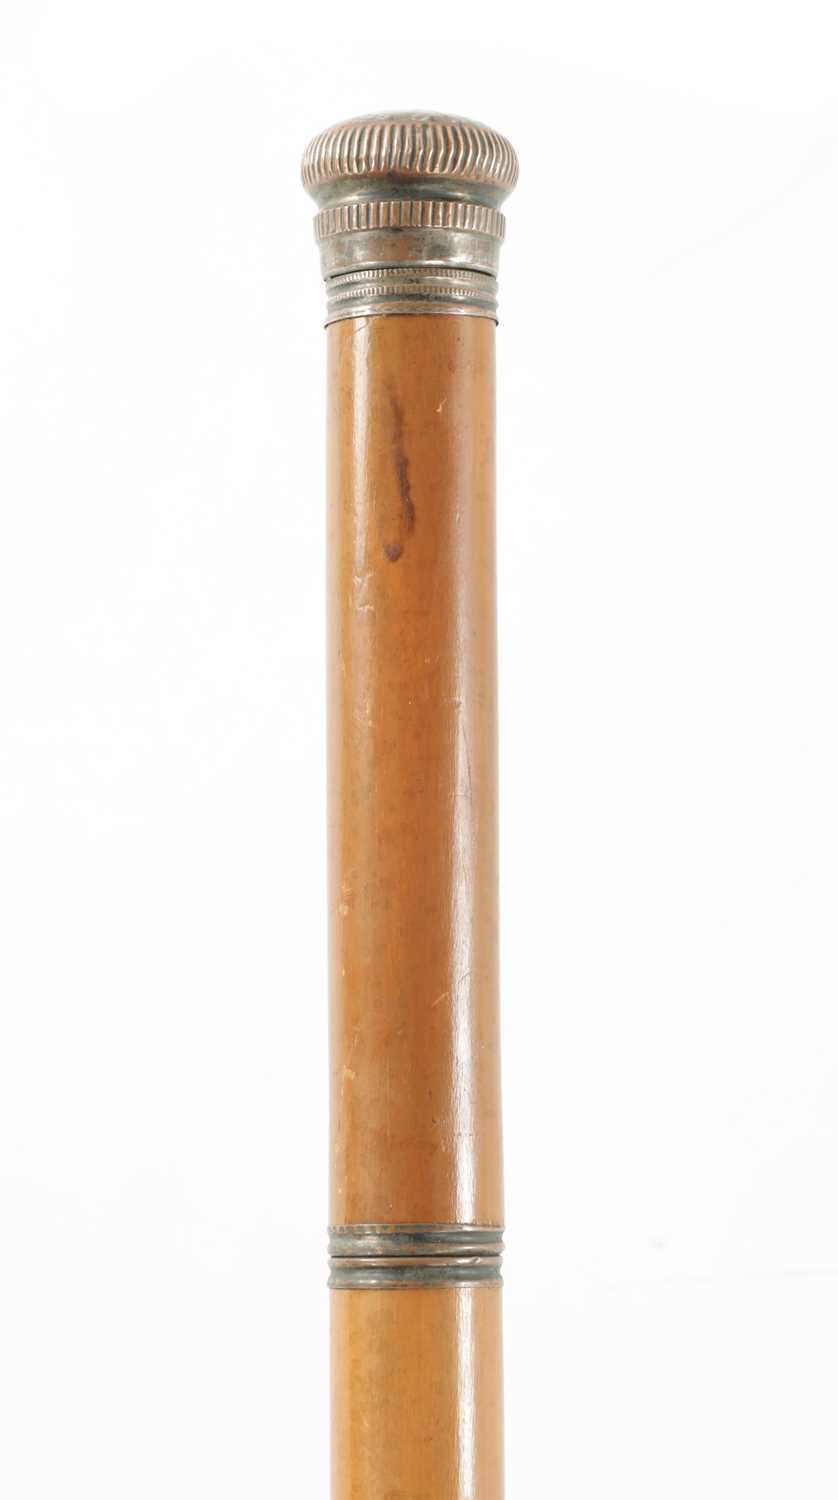 Lot 747 - AN EARLY 20TH CENTURY MALACCA CANE WALKING STICK FITTED WITH GLASS DECANTER